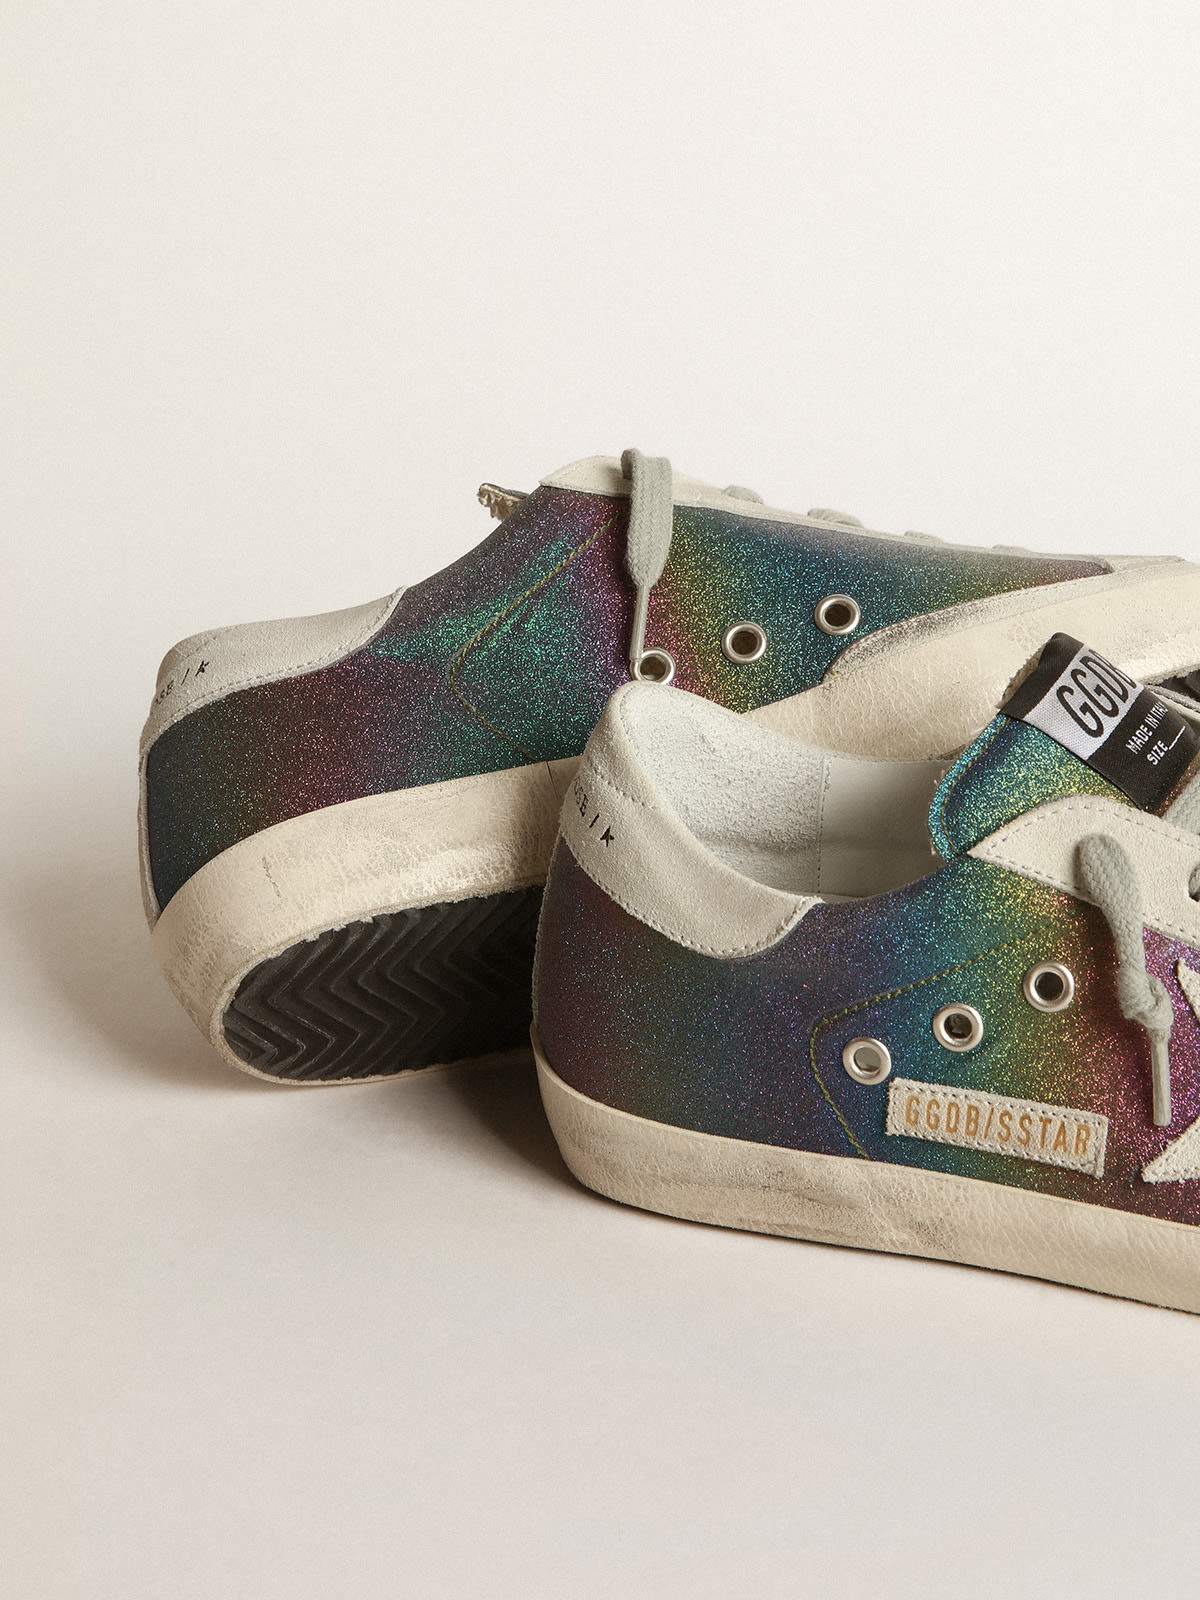 Golden Goose - Super-Star sneakers with rainbow glitter in 